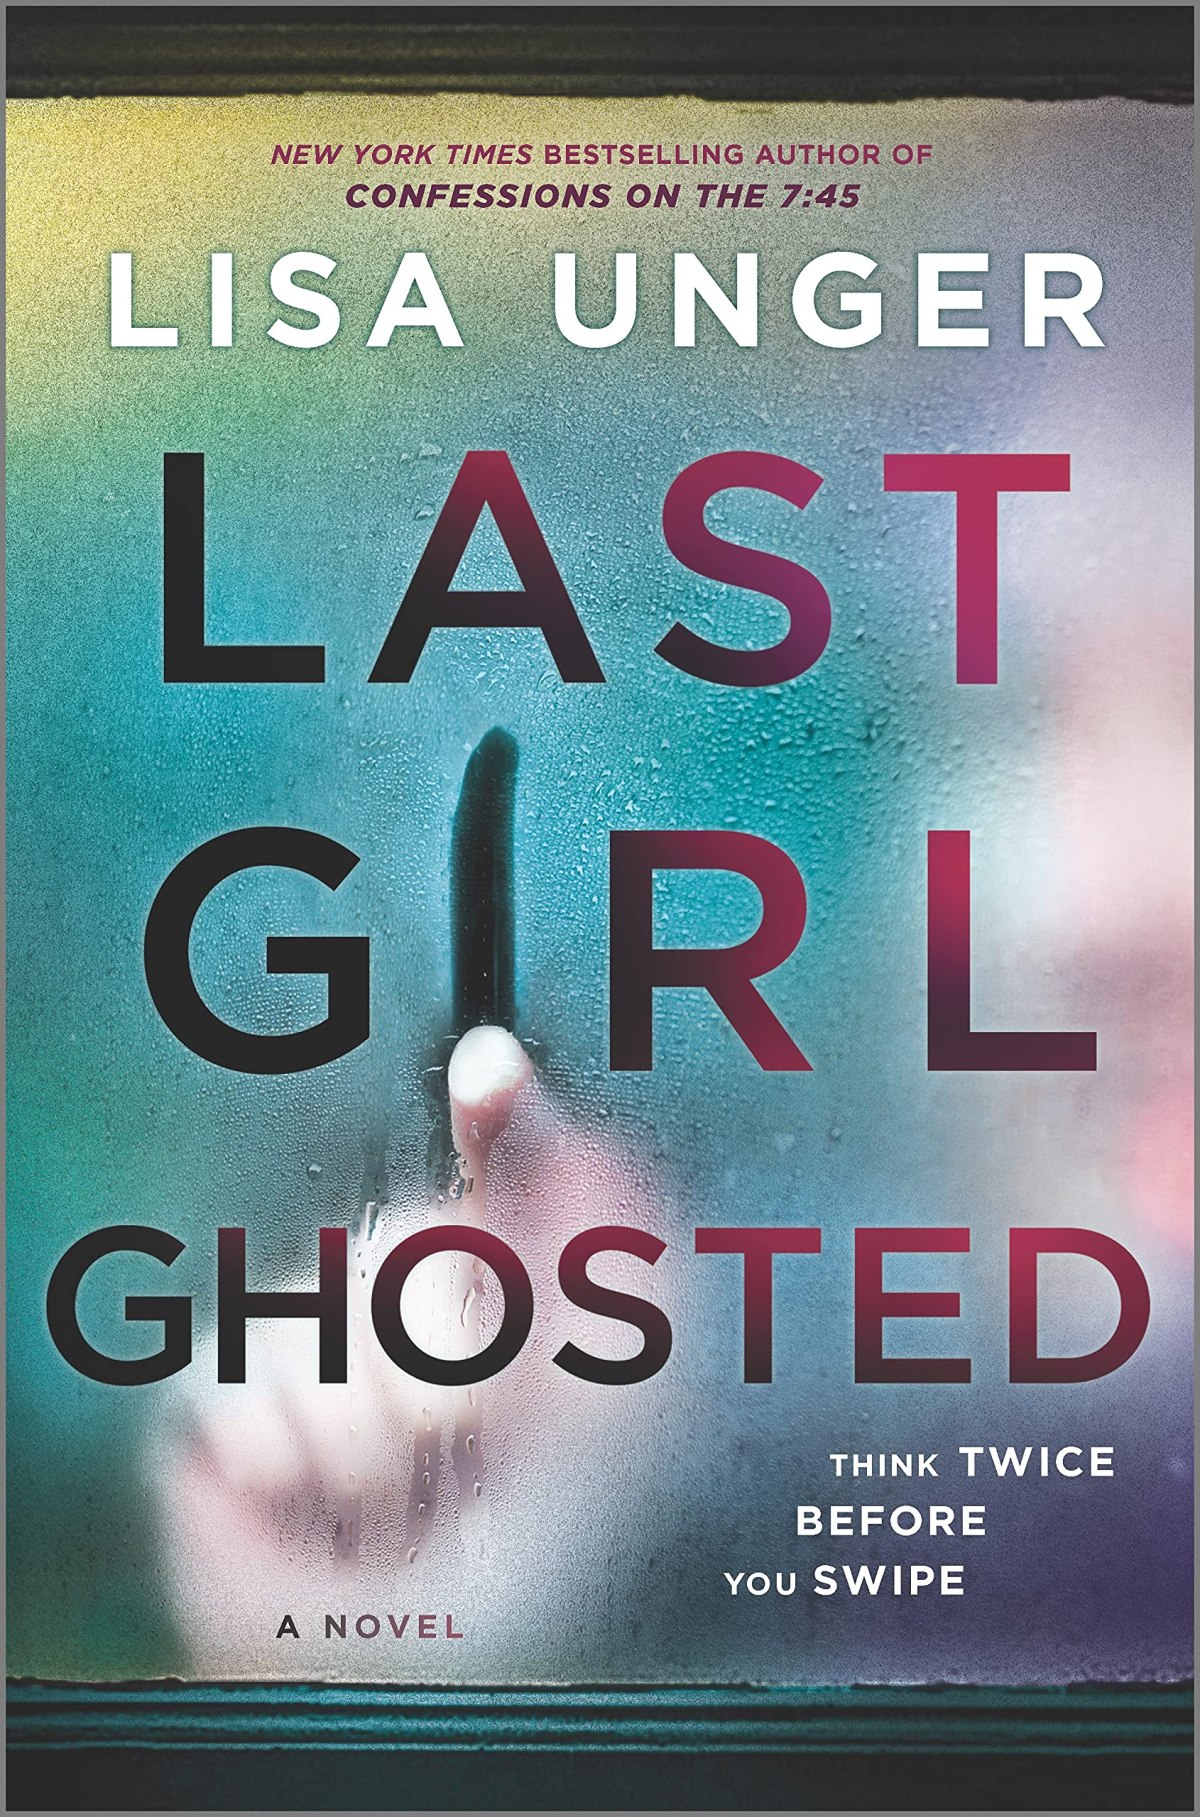 Book 161 – Last Girl Ghosted by Lisa Unger